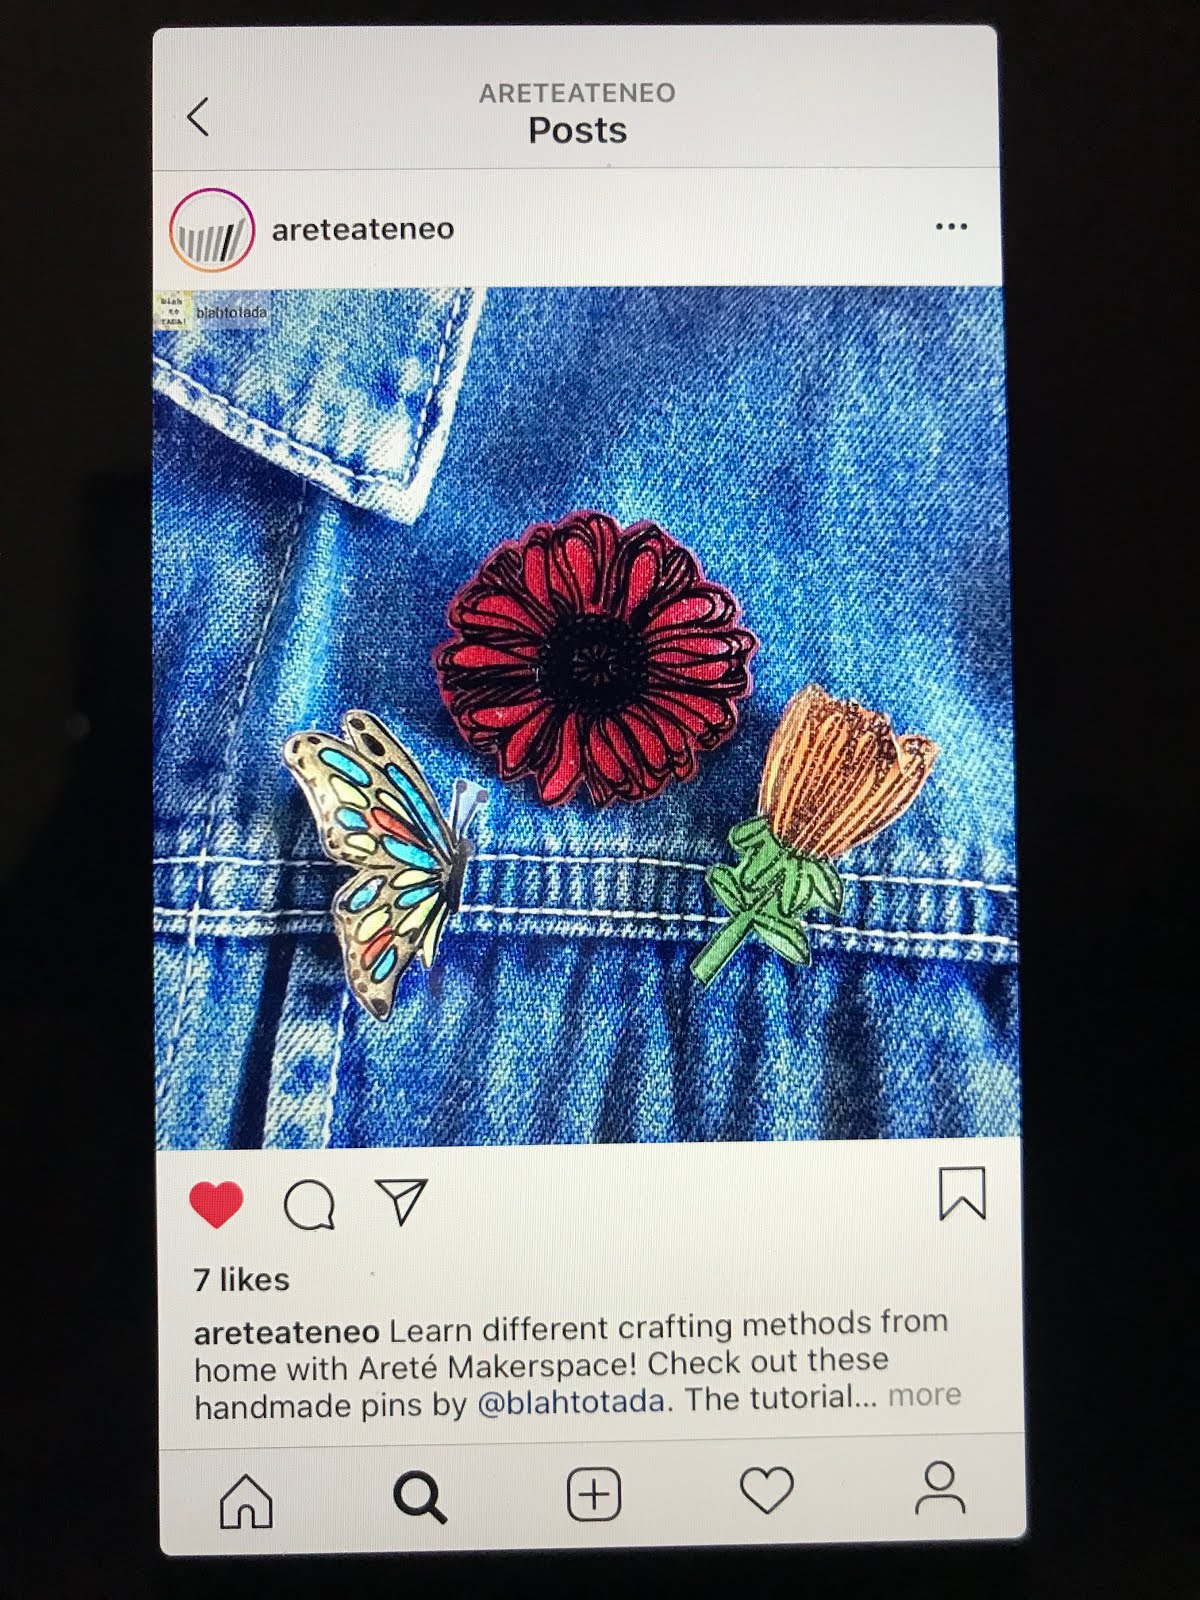 My Shrinky Dinks flower and butterfly pins are on the Arete Ateneo Instagram feed!